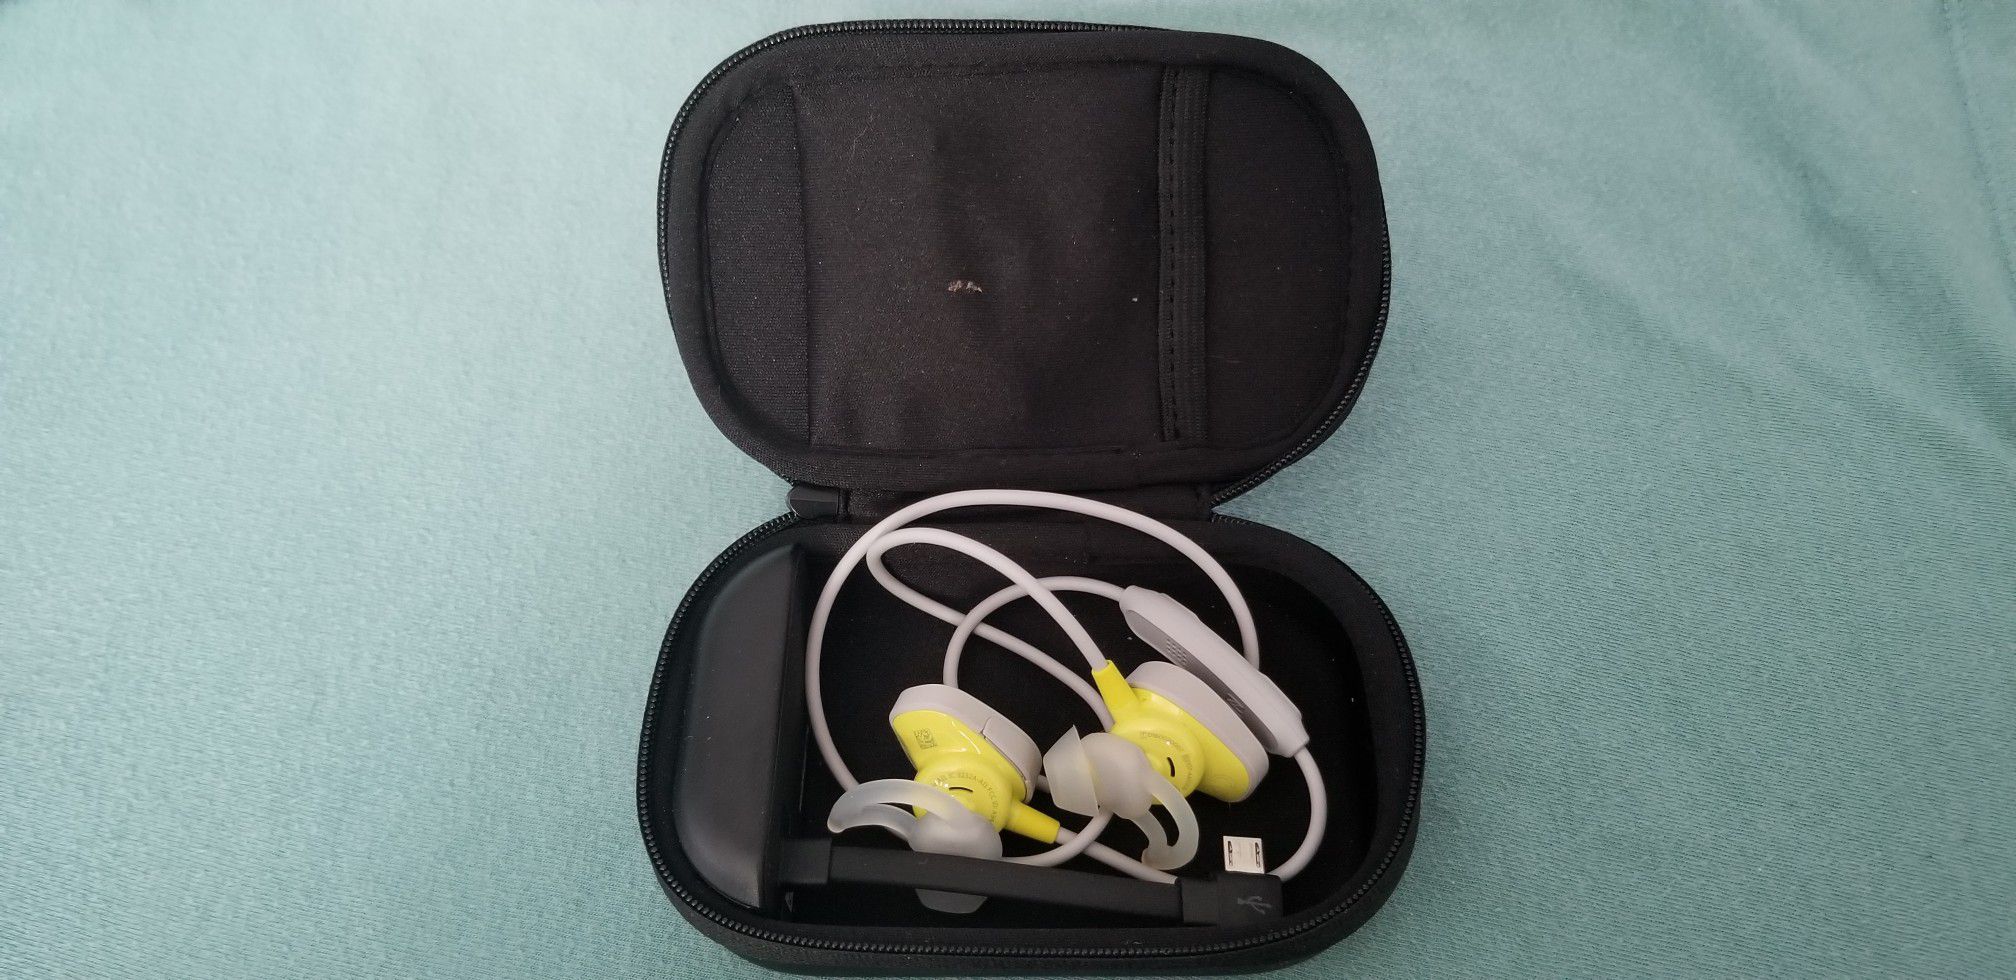 Bose Soundsport Wireless Earbud Headphones With Bose Charging Case